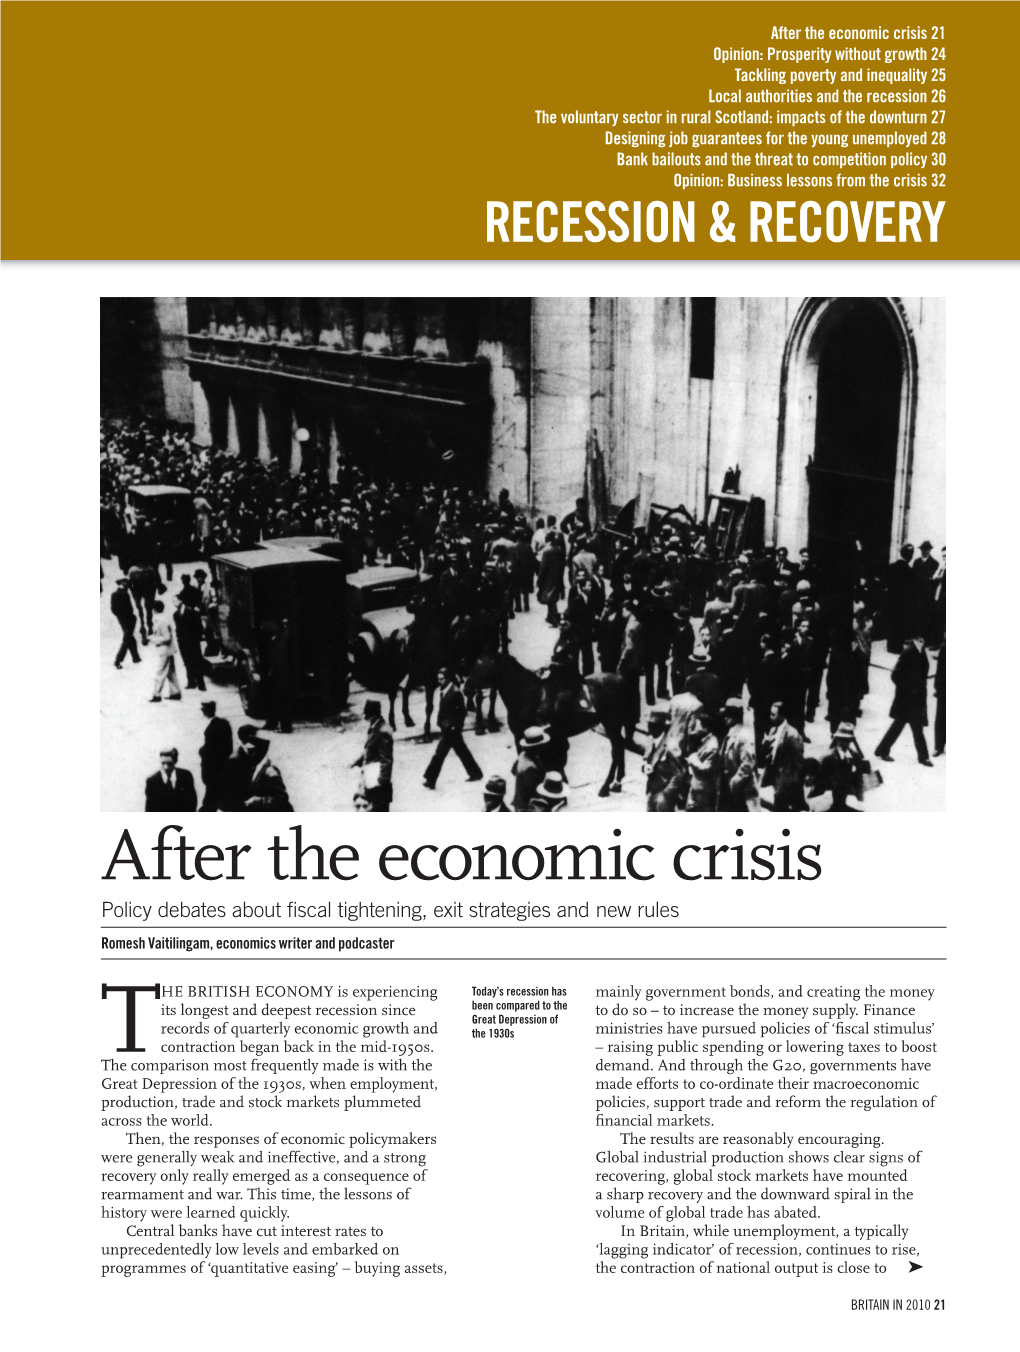 Britain in 2010 Recession and Recovery